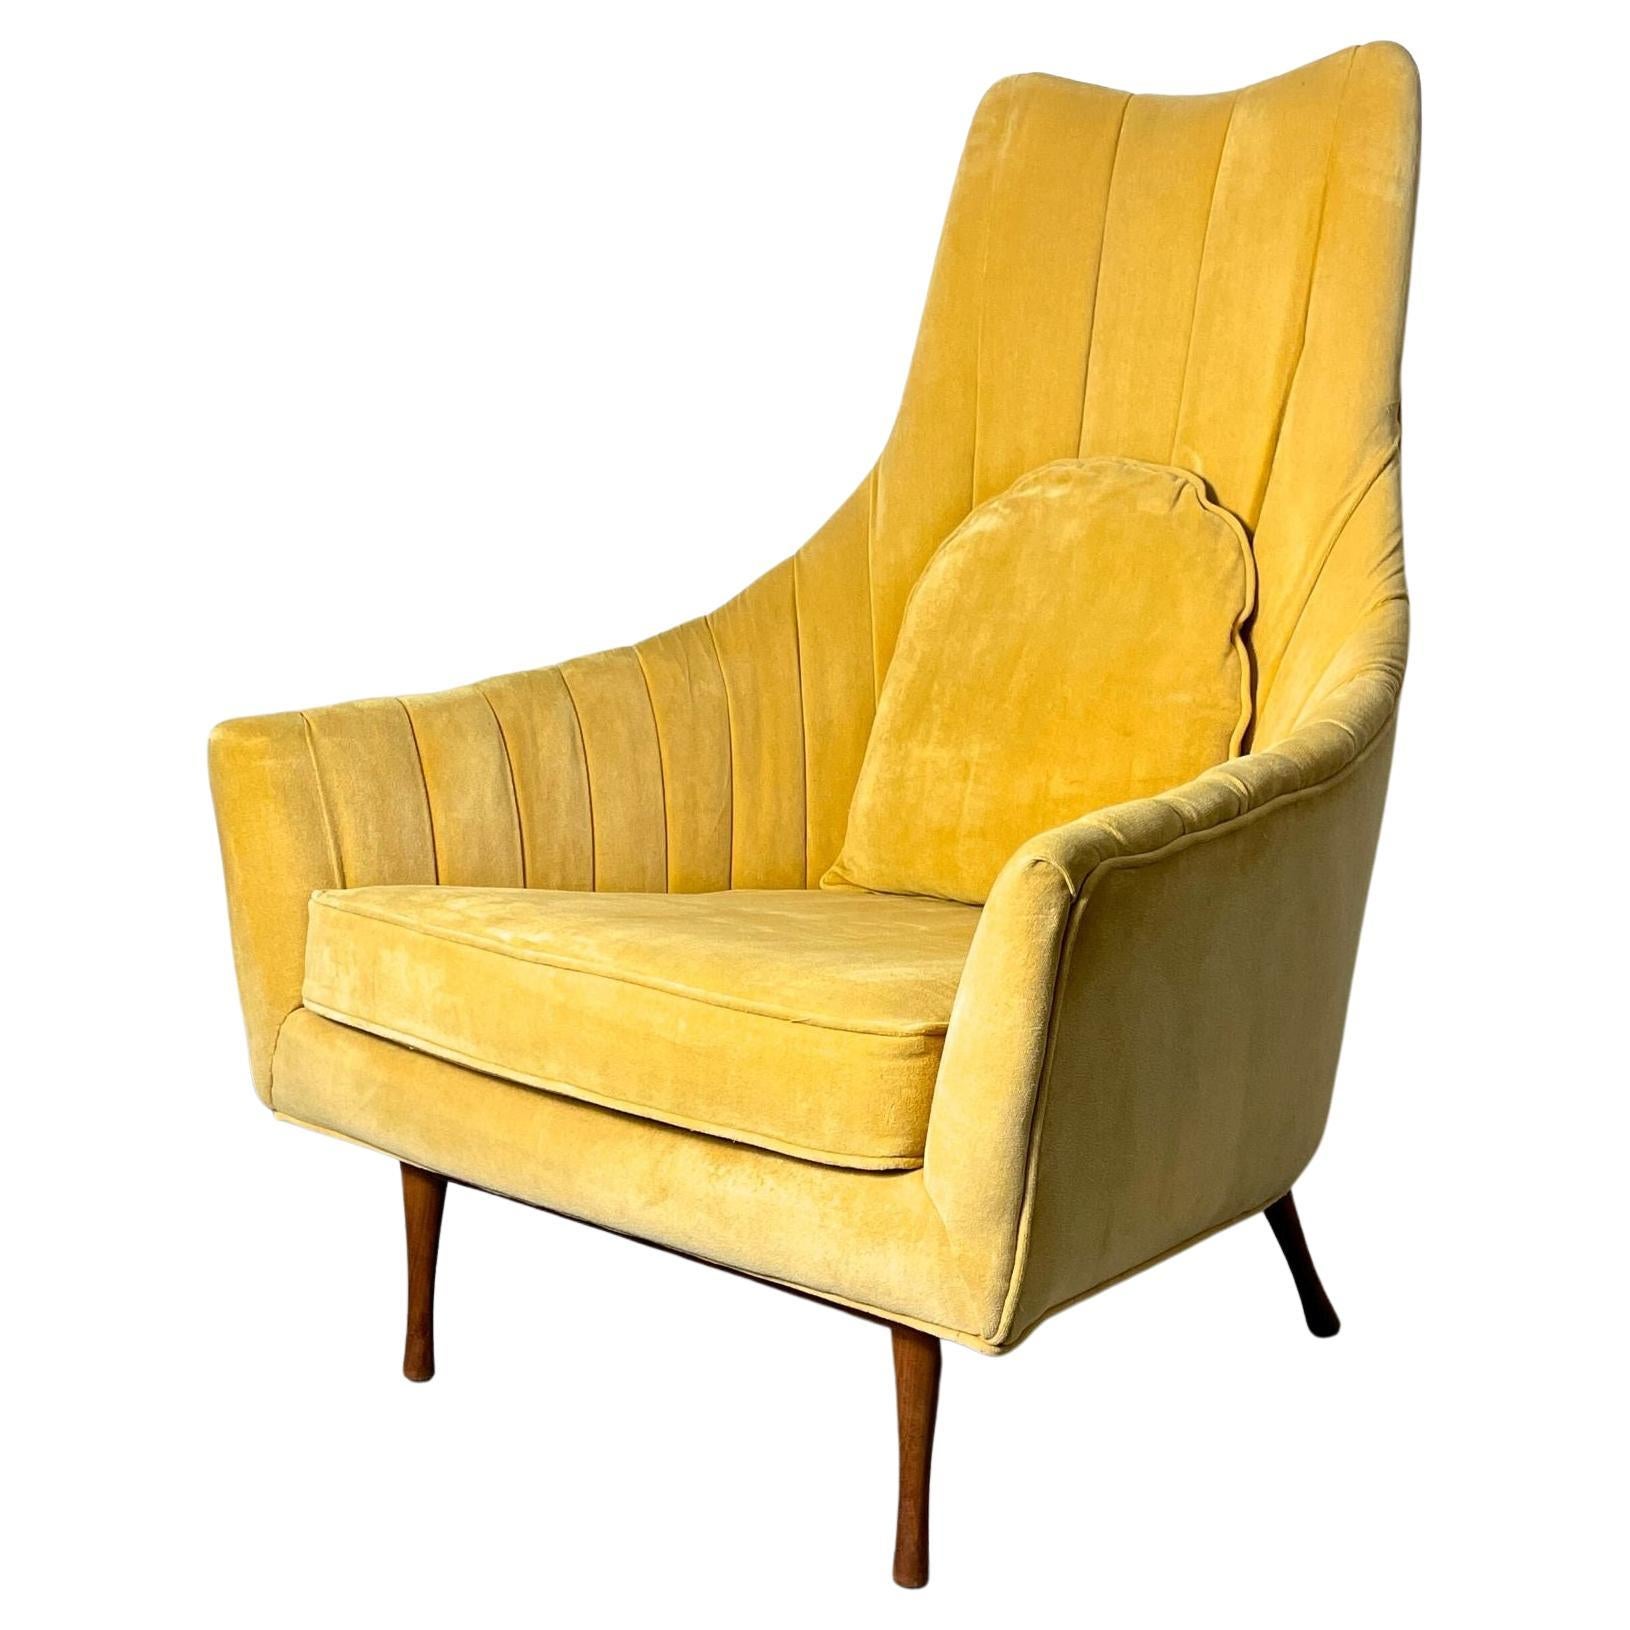 Vintage Yellow Symmetric Group Lounge Chair by Paul McCobb for Widdicomb 1960s